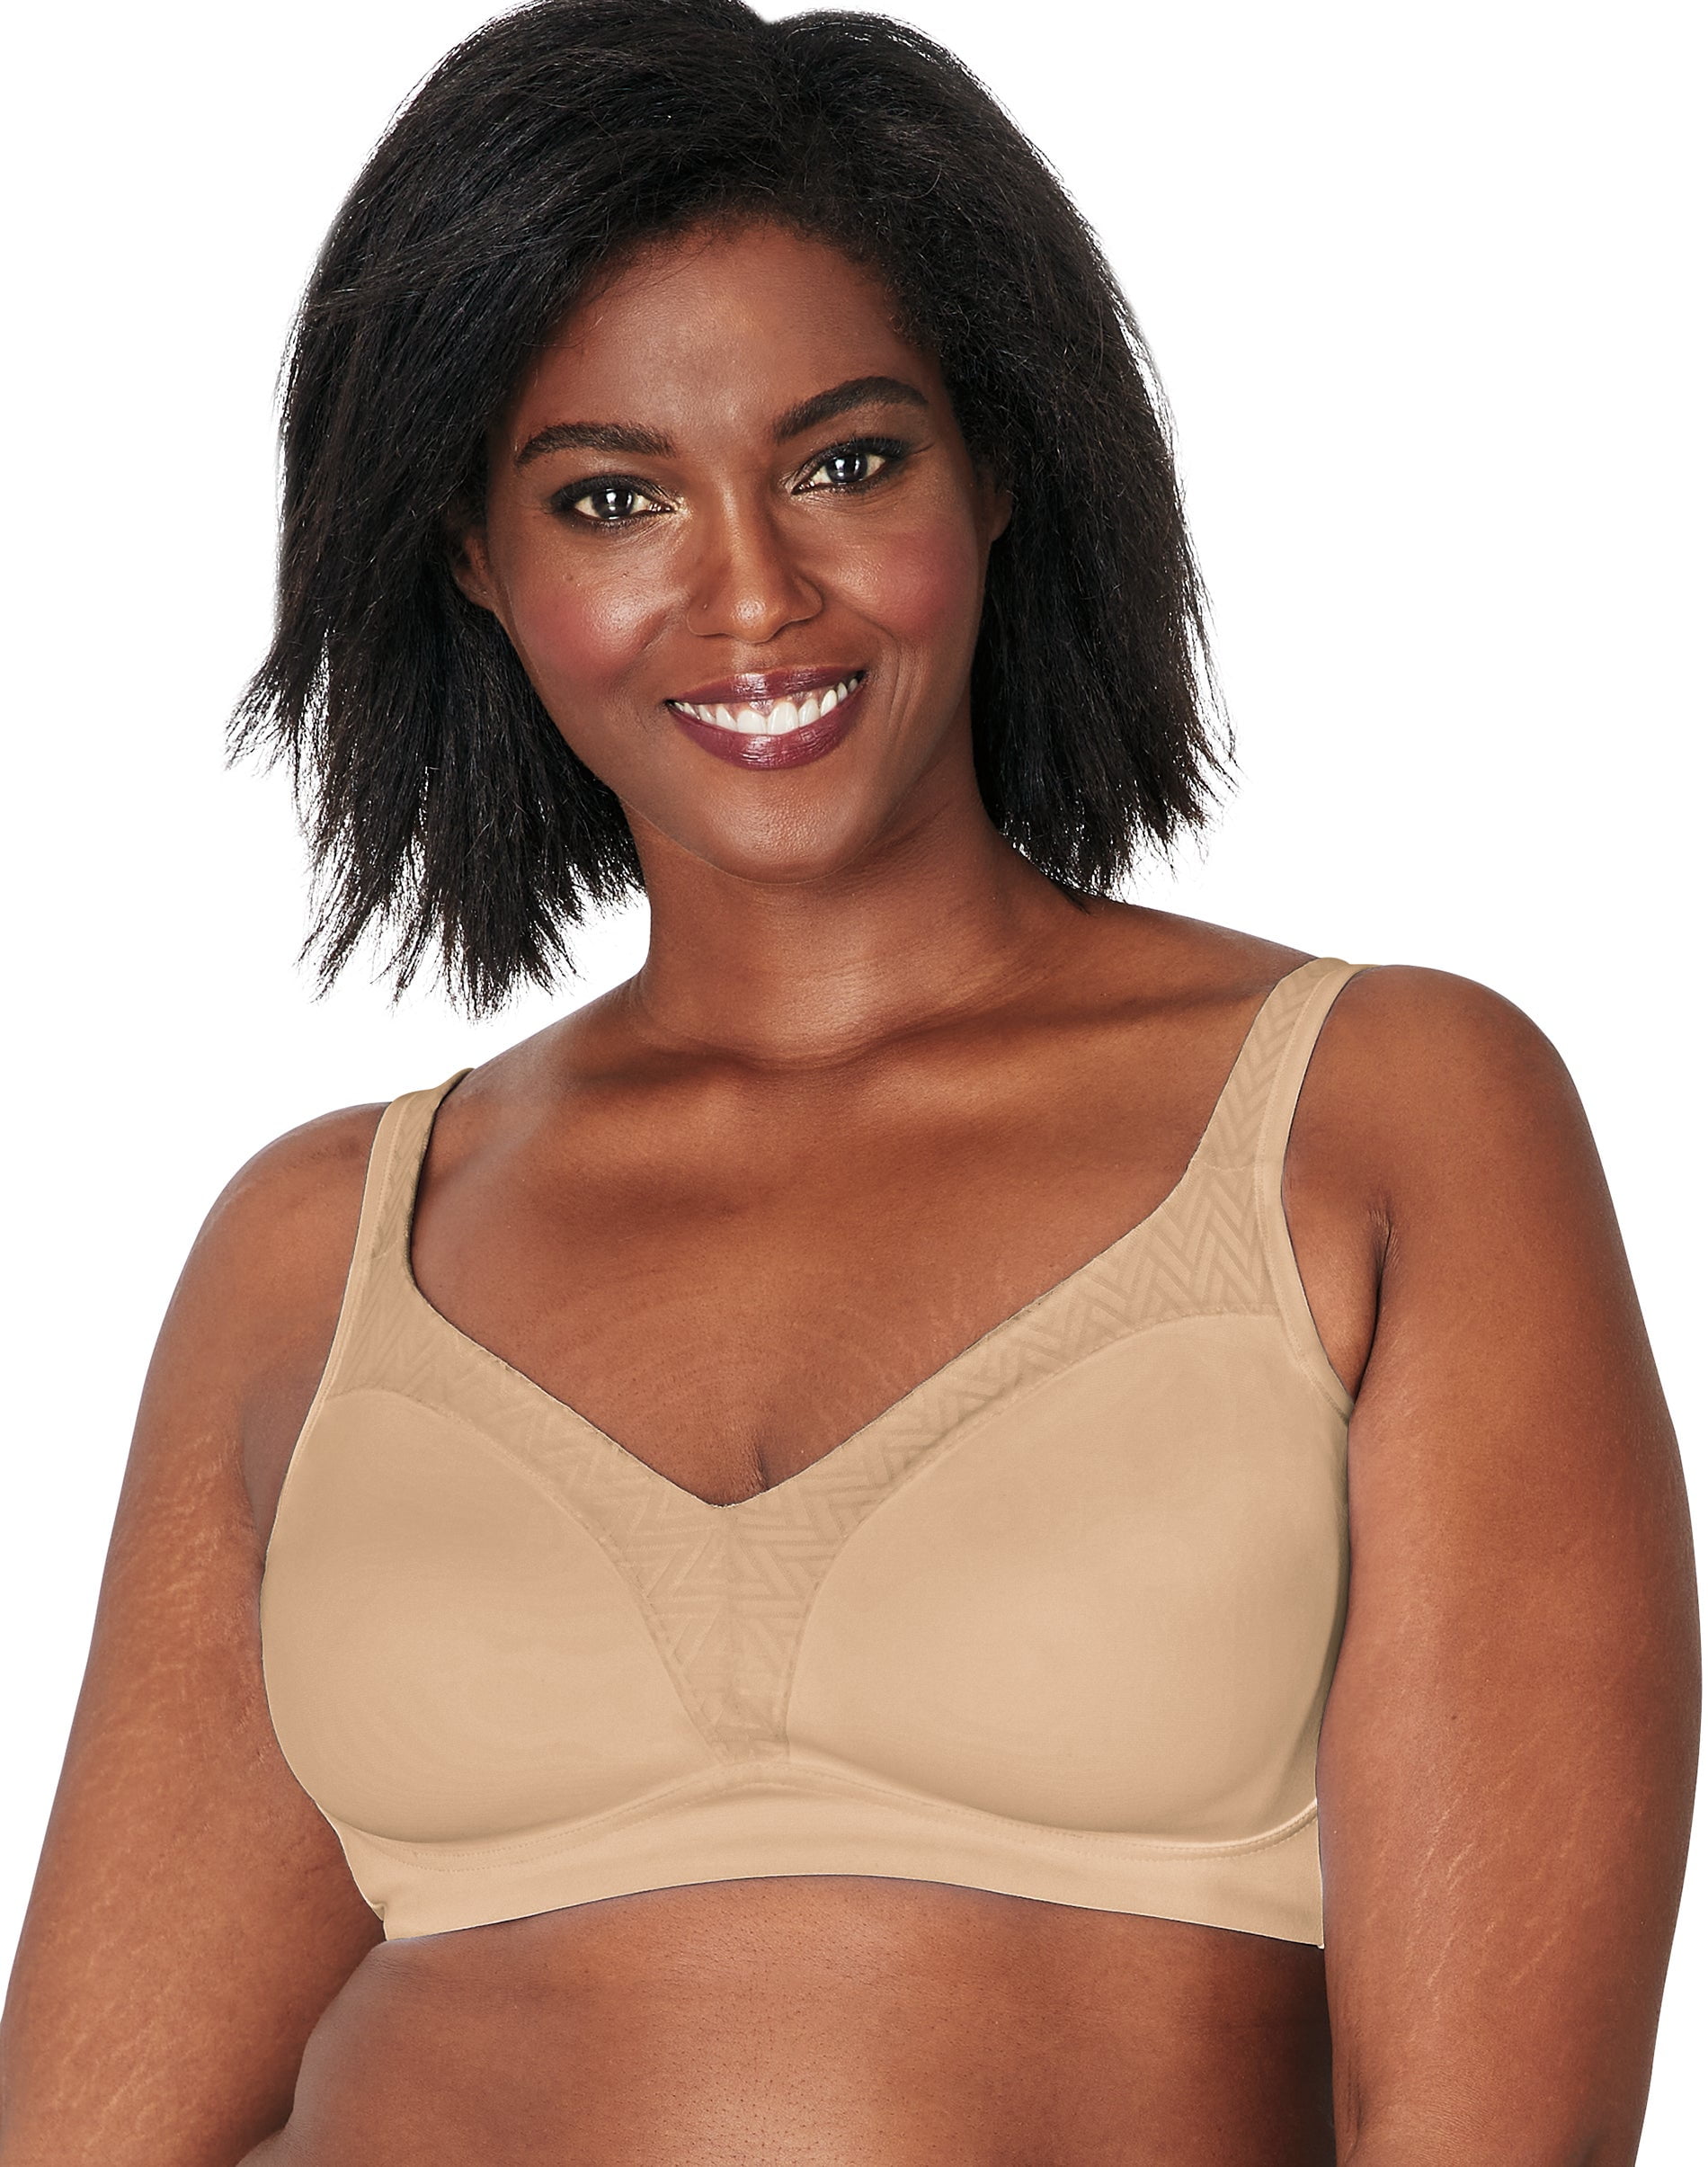 18 Hour Bounce Control Wirefree Bra Black 38C by Playtex